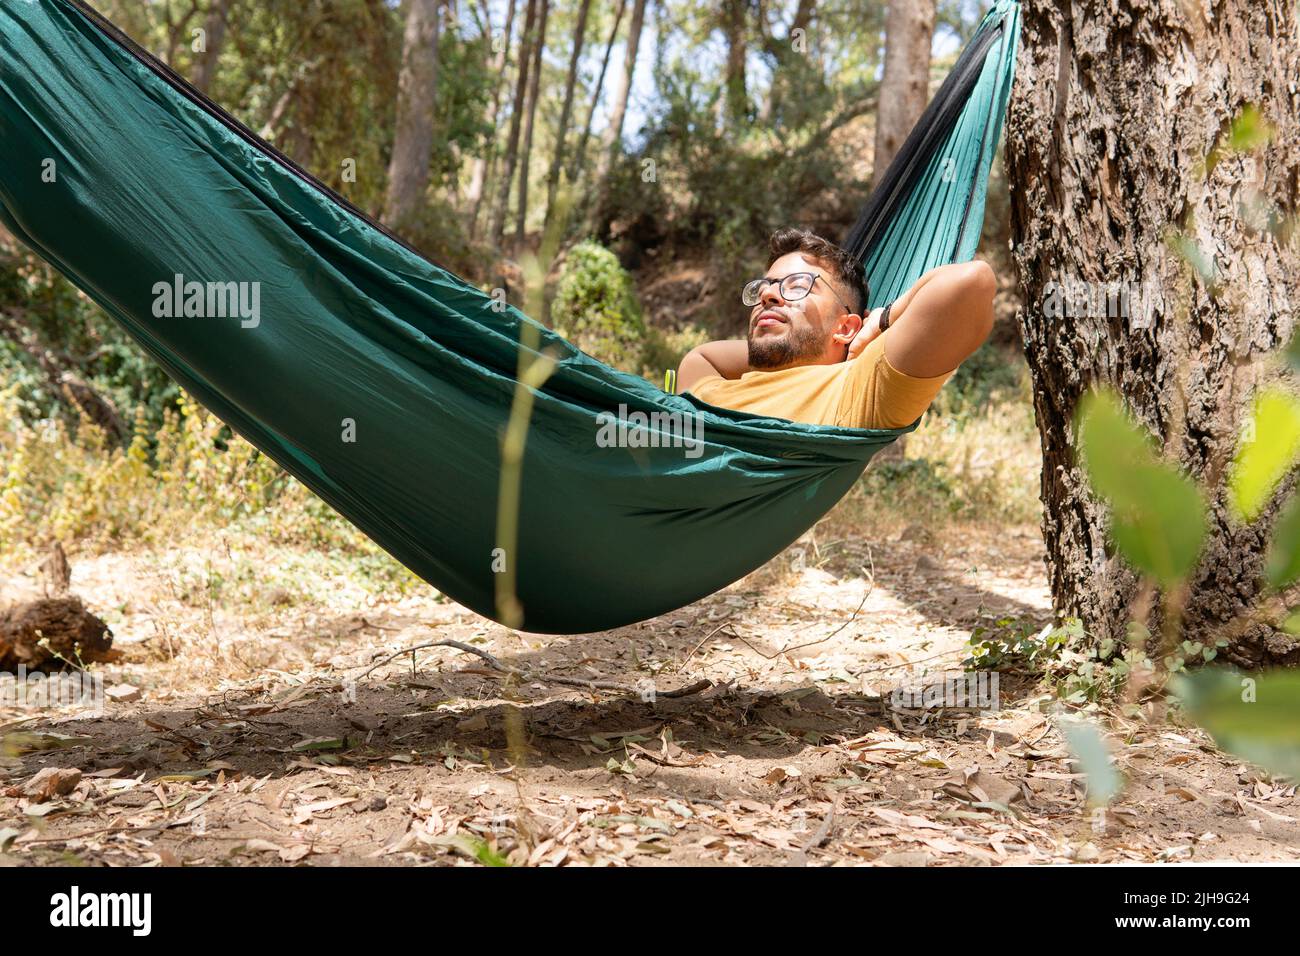 Open shot of a guy with glasses and yellow t-shirt lying in a green hammock enjoying nature in a forest Stock Photo